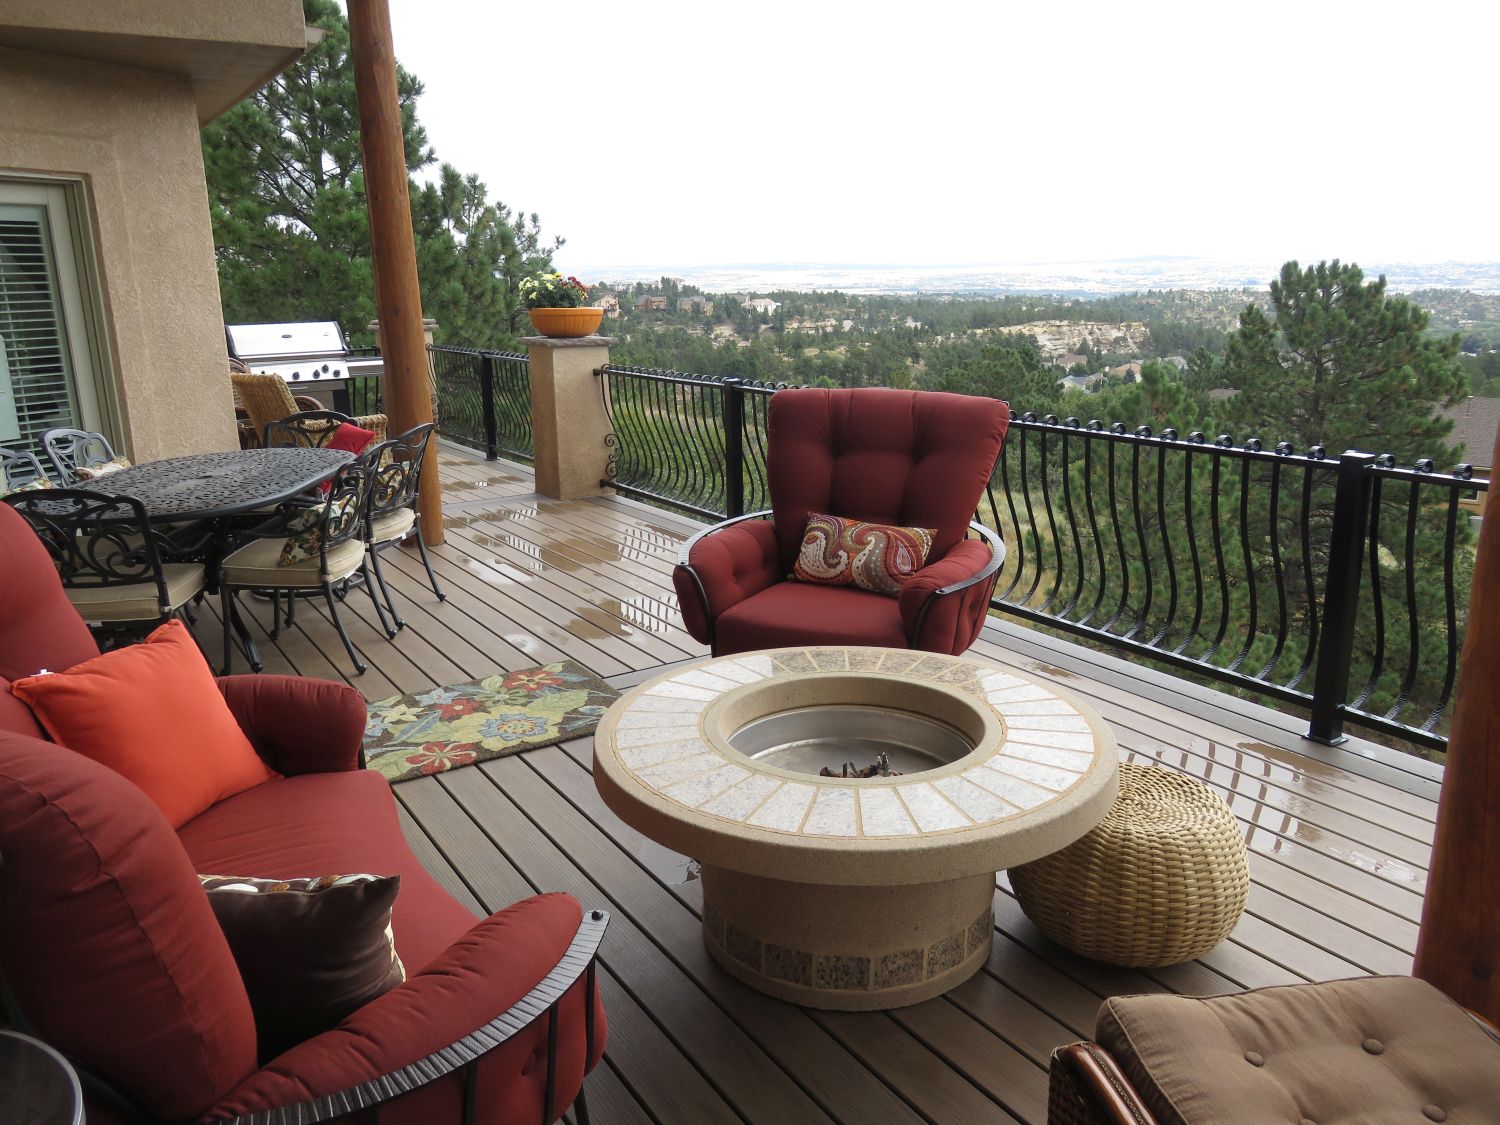 Elevated deck with cushy outdoor chairs surrounding a firepit.